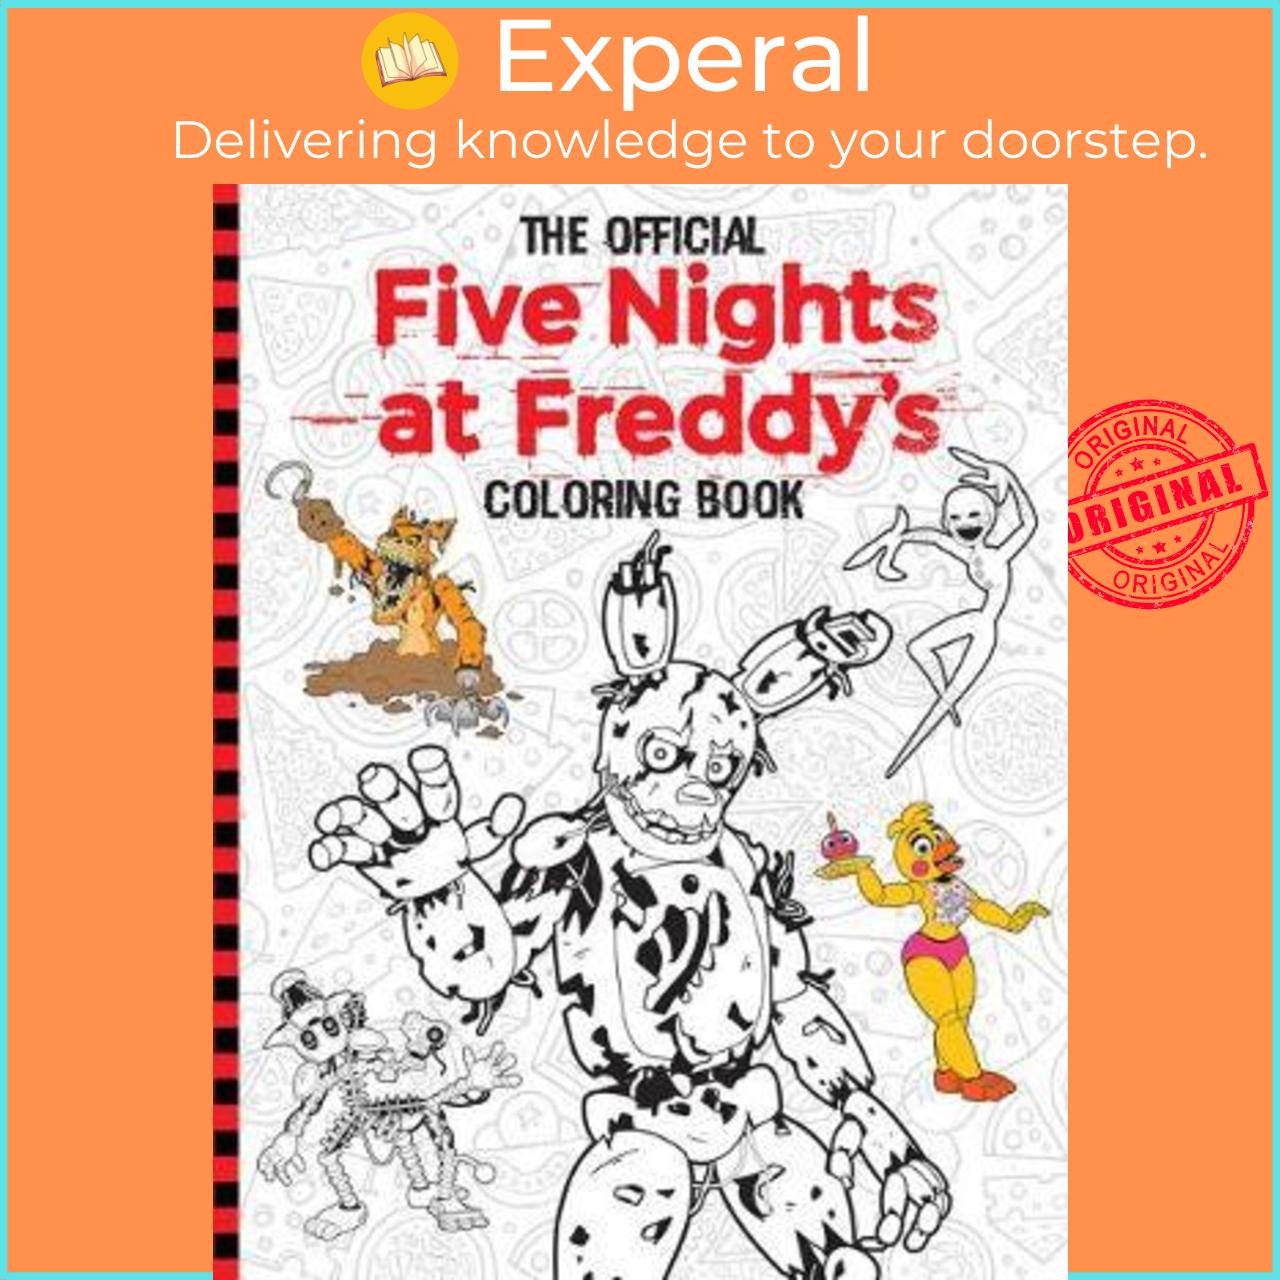 Sách - Official Five Nights at Freddy's Coloring Book by Scott Cawthon (US edition, paperback)